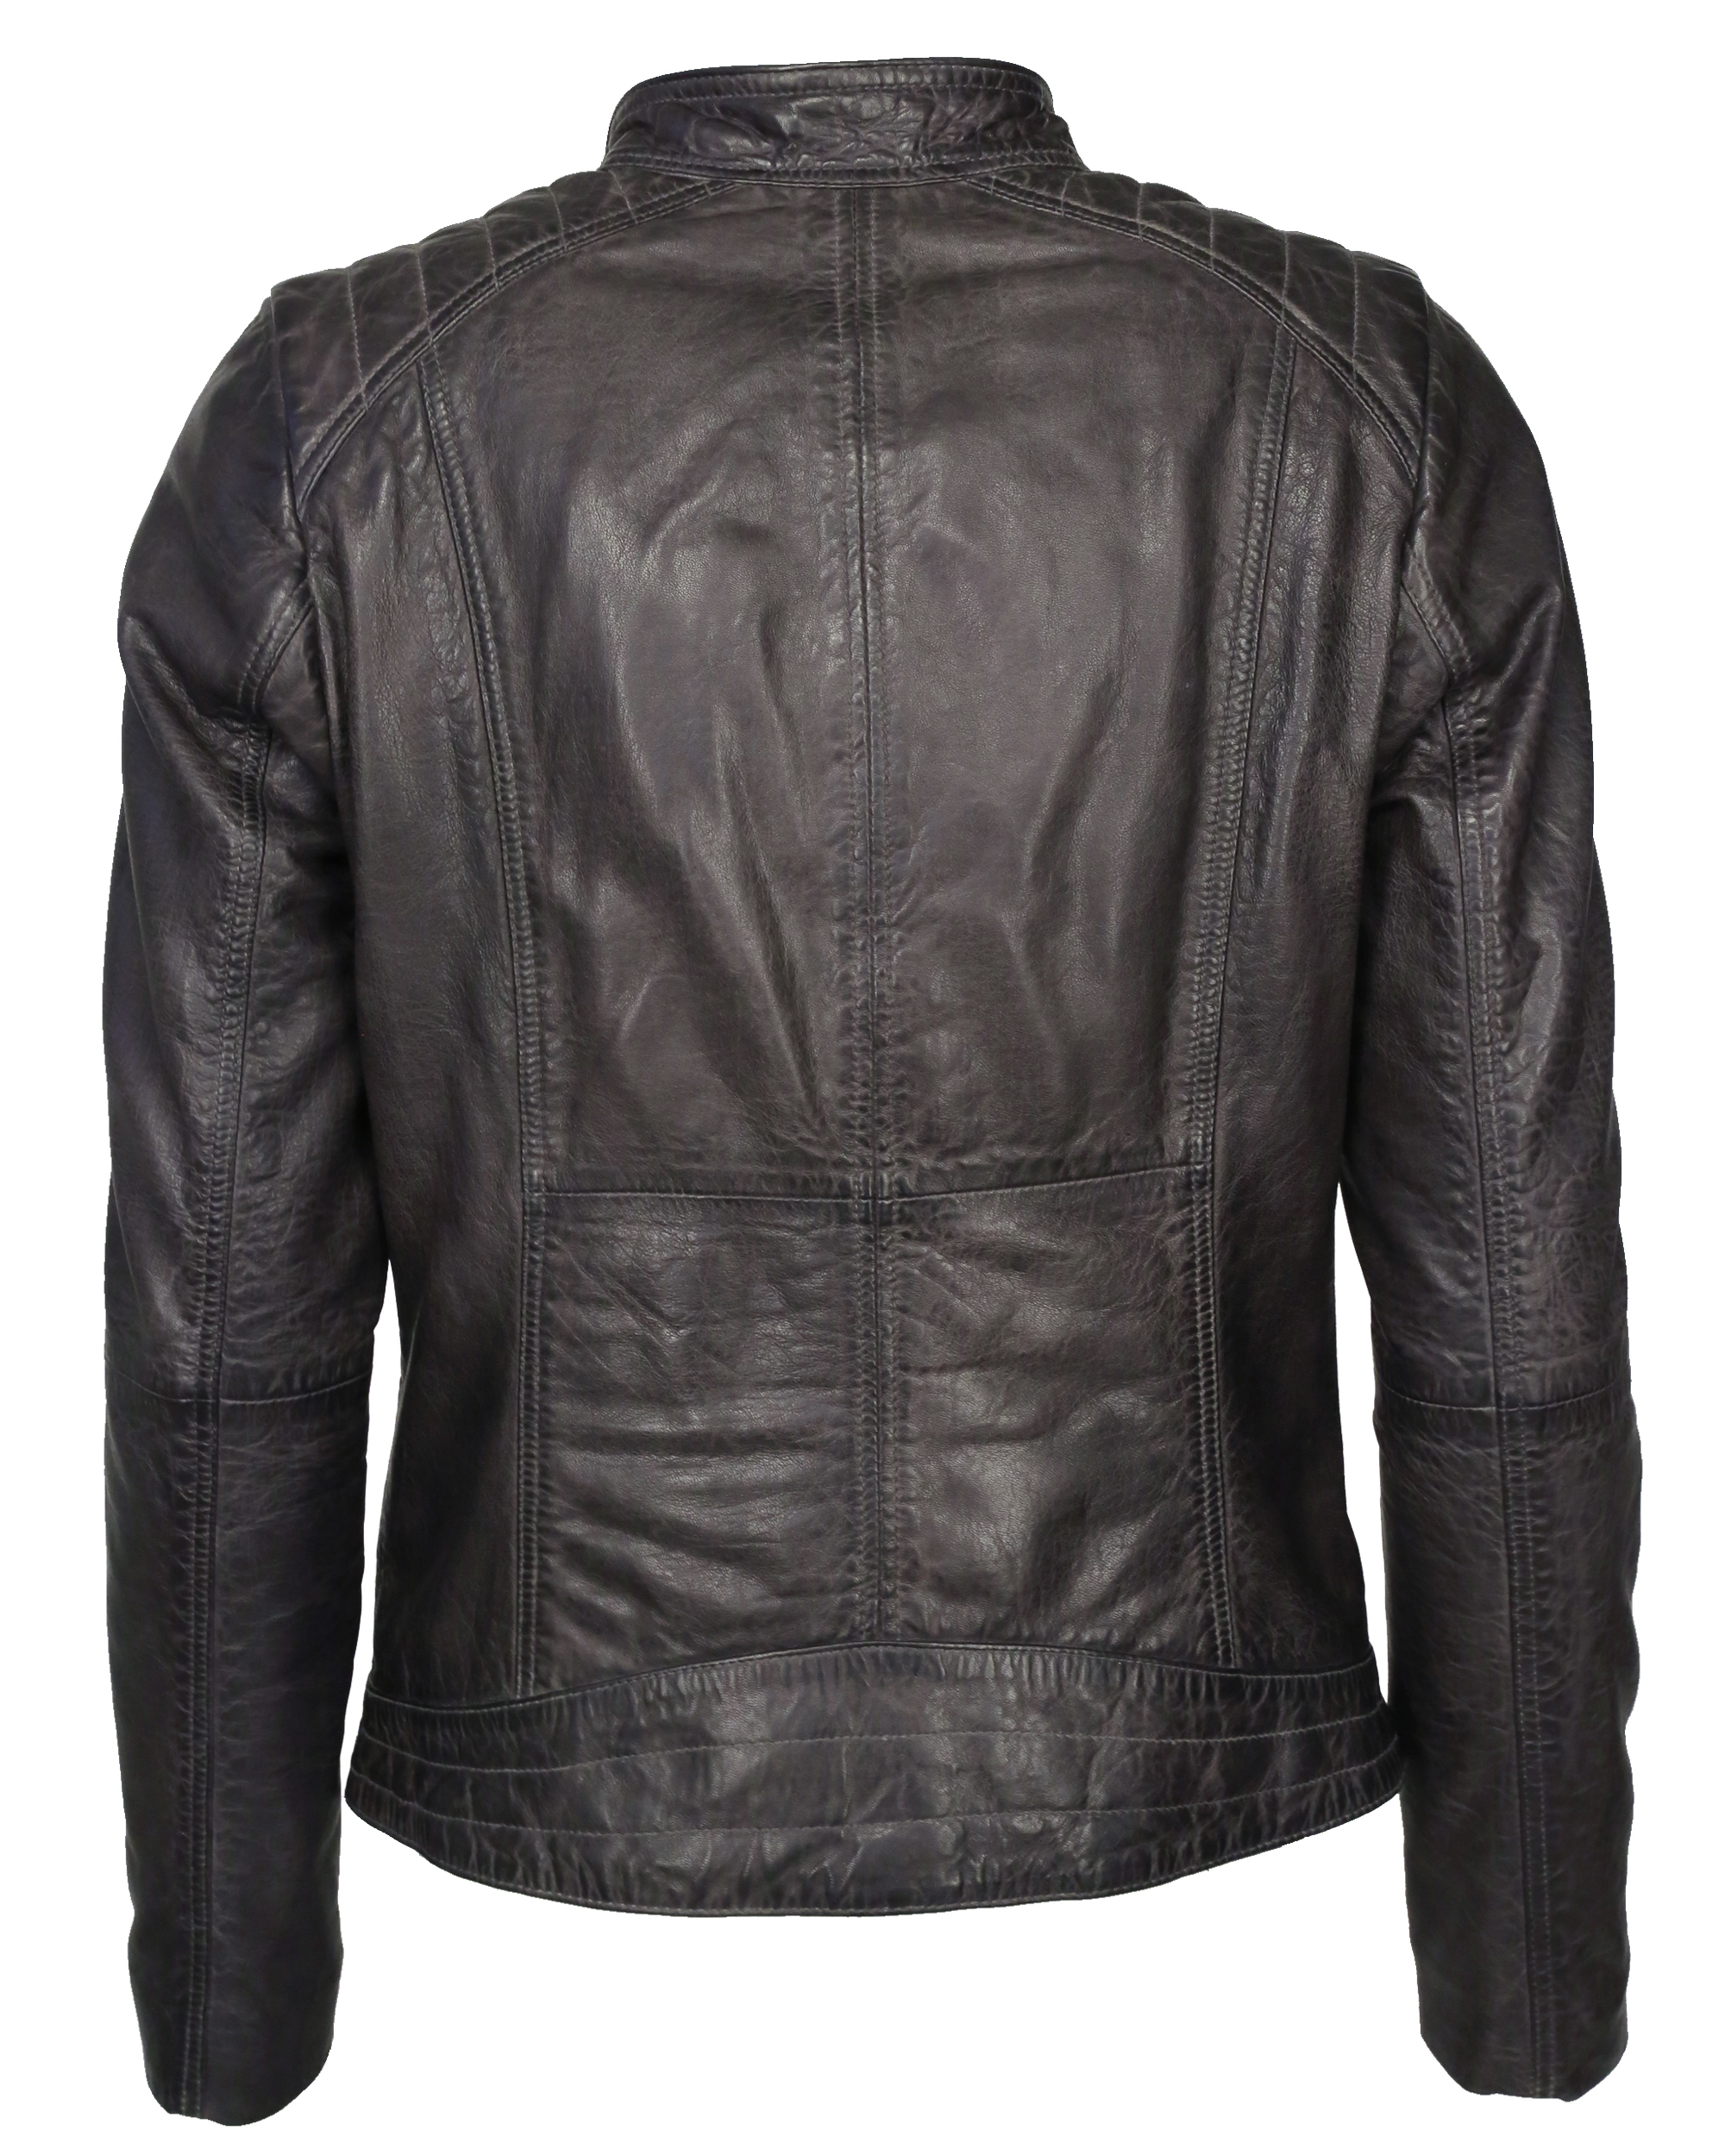 MUSTANG Jacke Amilia in Graphit 